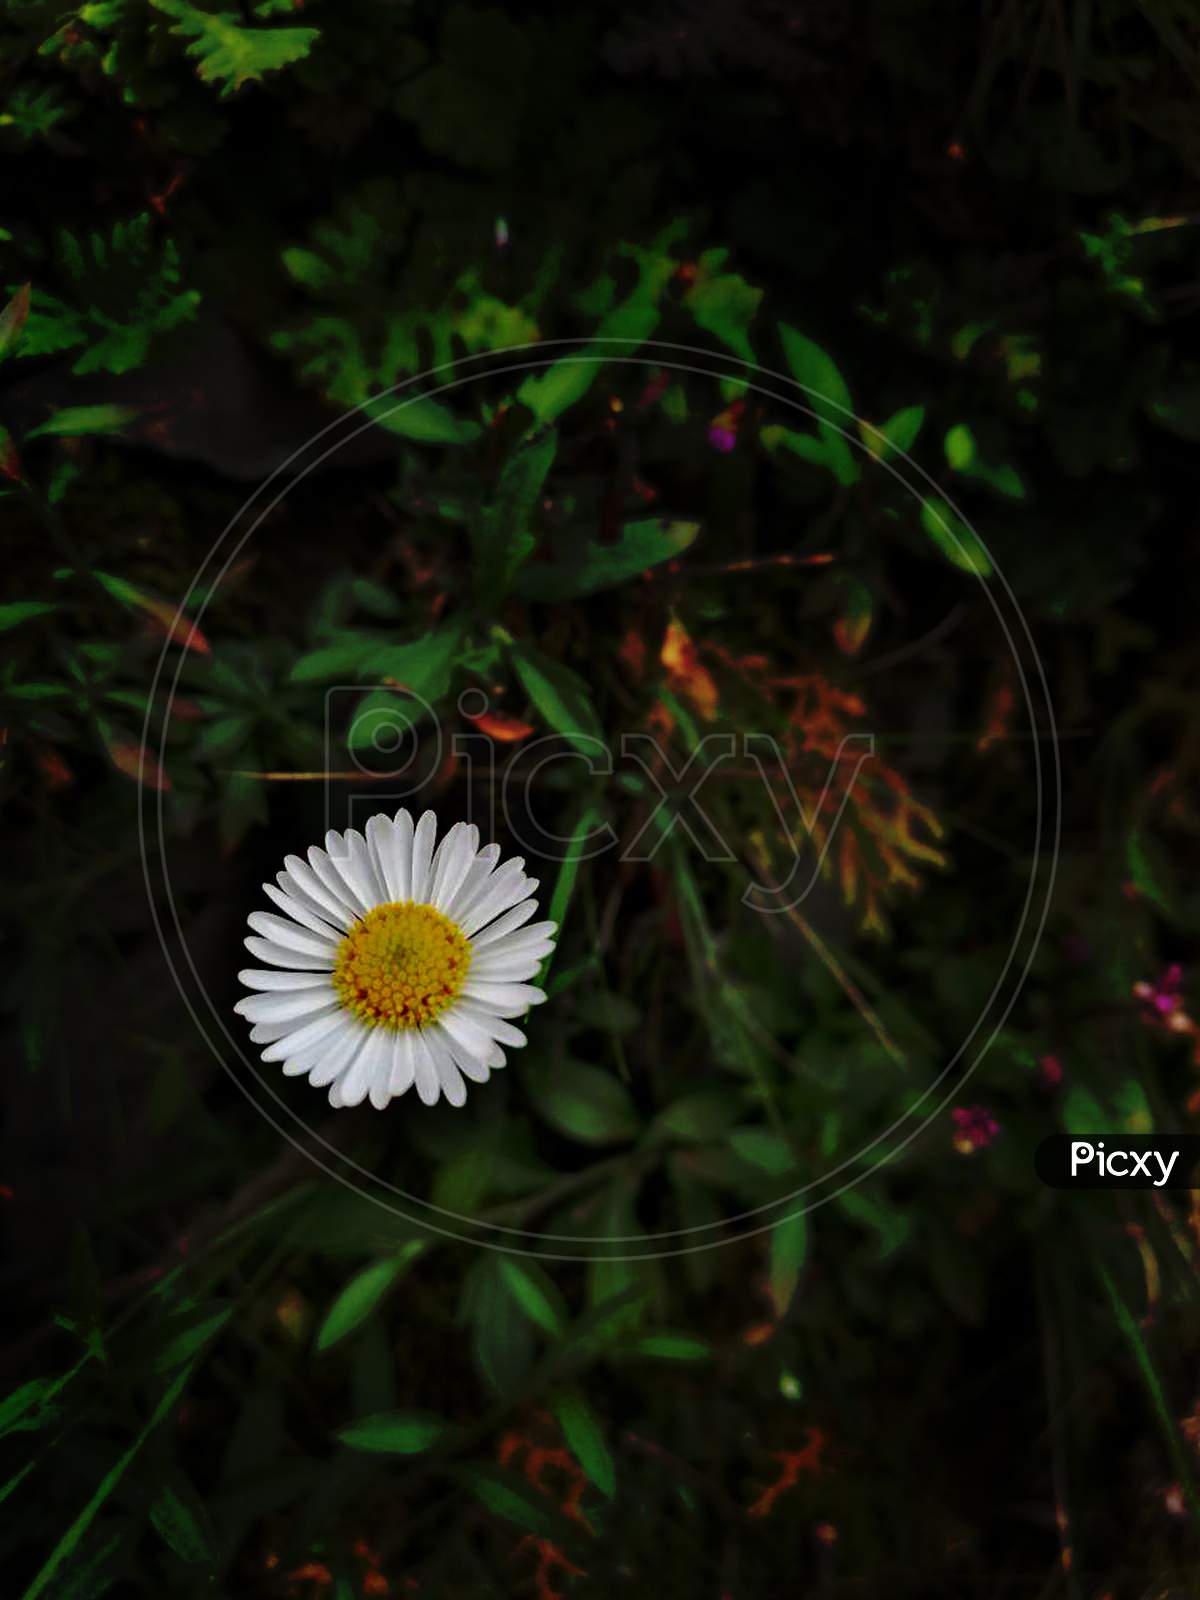 Portrait Image Of Common Daisy On The Centre And The Main Attaction Of Image For Social Media Posts, Ads And Many More For Digital Work Purposes